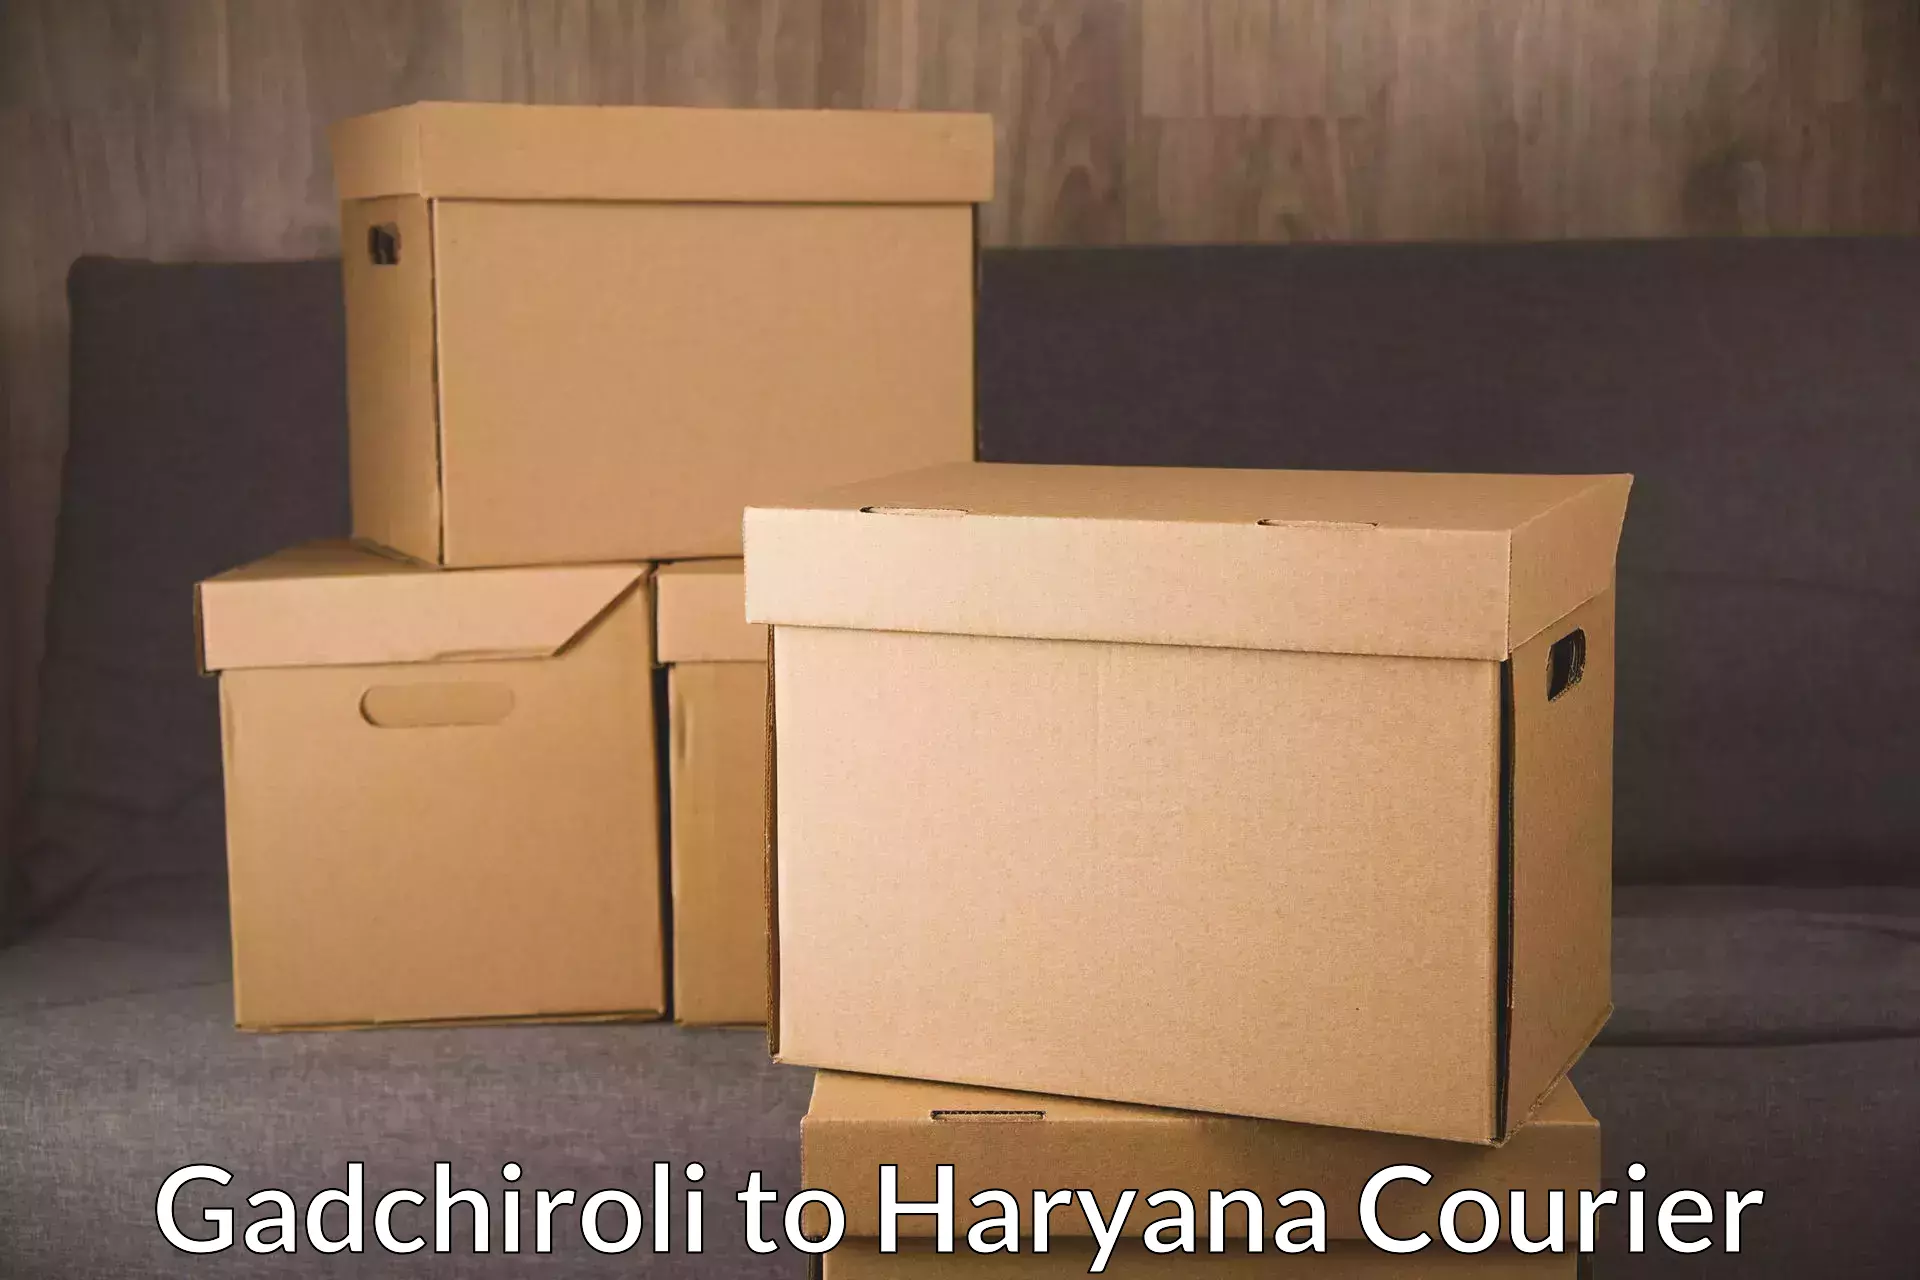 Package delivery network Gadchiroli to Haryana